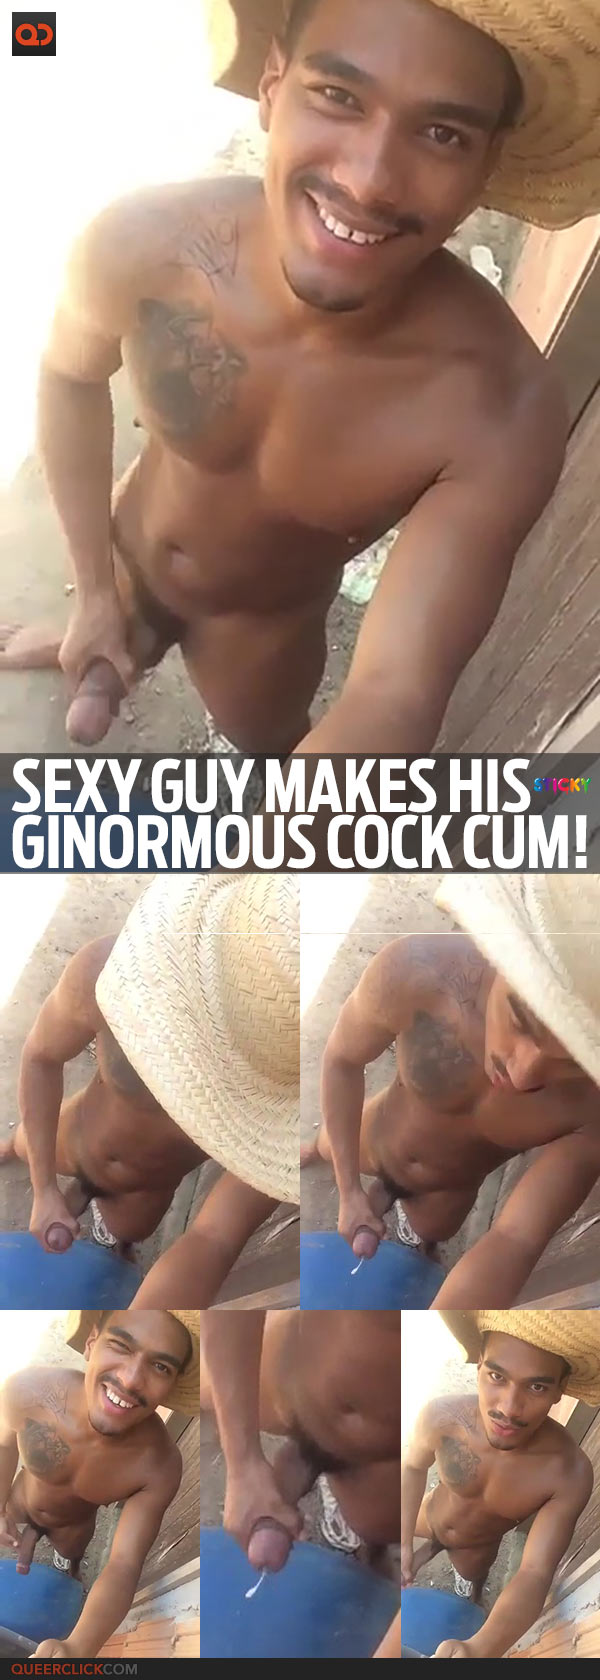 Sexy Guy Makes His Ginormous Cock Cum!